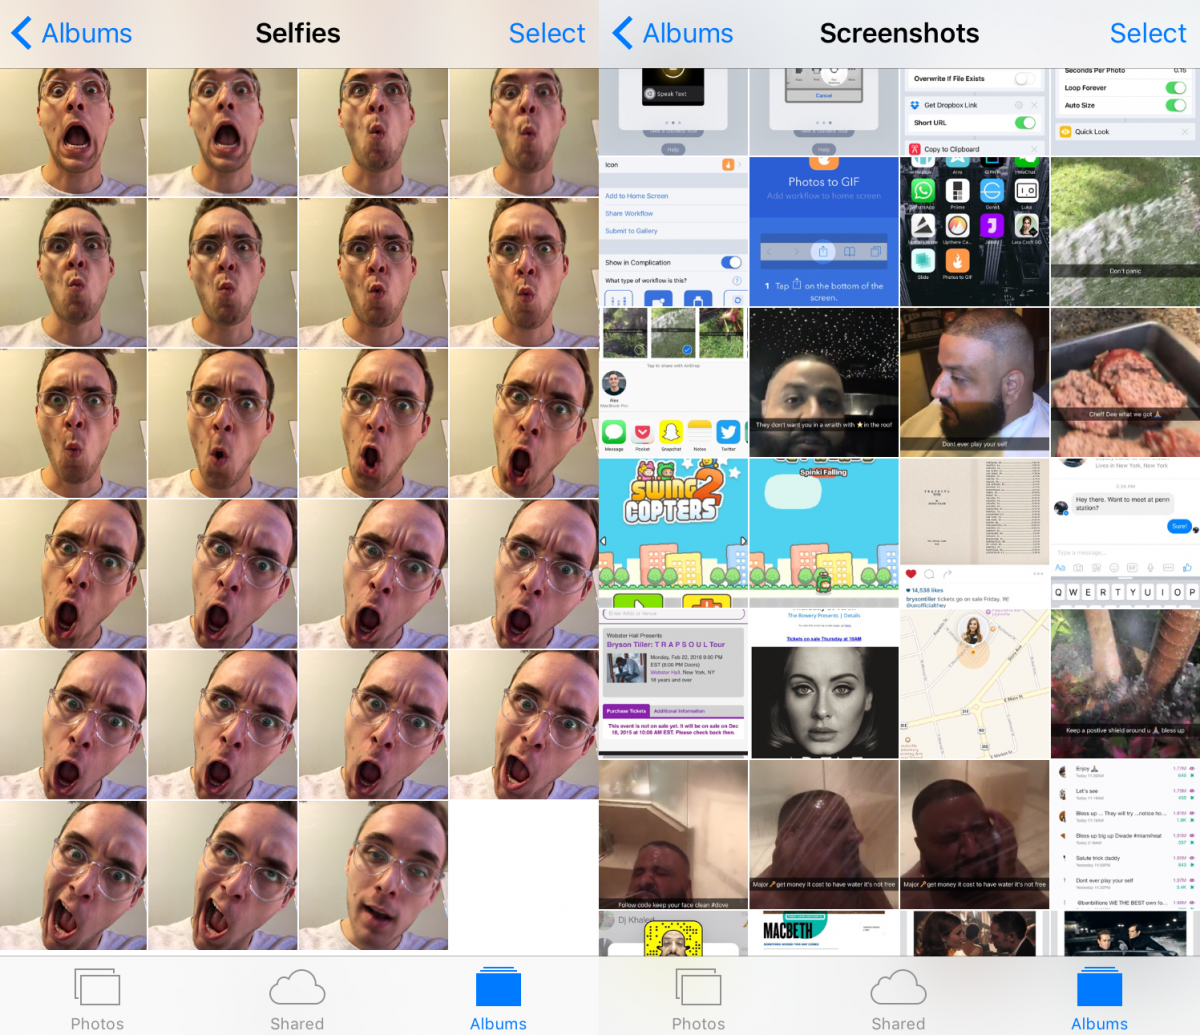 see-all-of-your-selfies-and-screenshots-in-their-own-albums.jpg